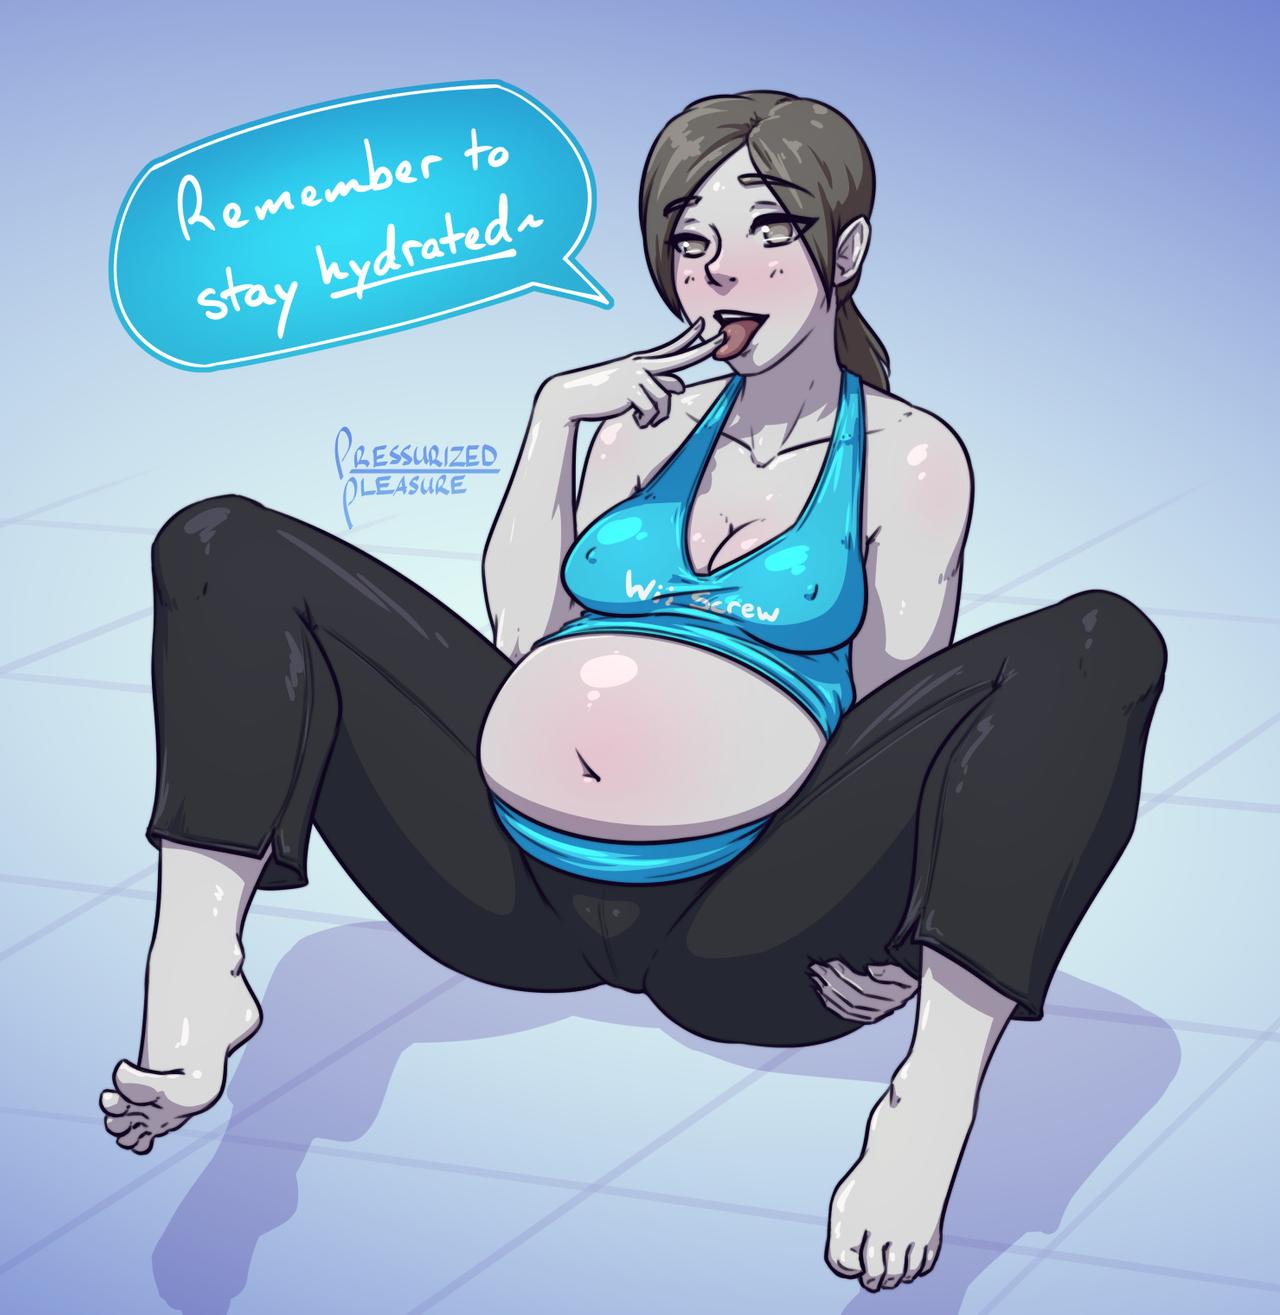 ahe_gao black_hair chubby chubby_female female huge_belly nipples_visible_through_clothing pressurizedpleasure pussy_visible_through_clothes solo spread_legs sweatpants text_bubble tongue_out white_skin wii_fit wii_fit_trainer yoga_instructor yoga_pants